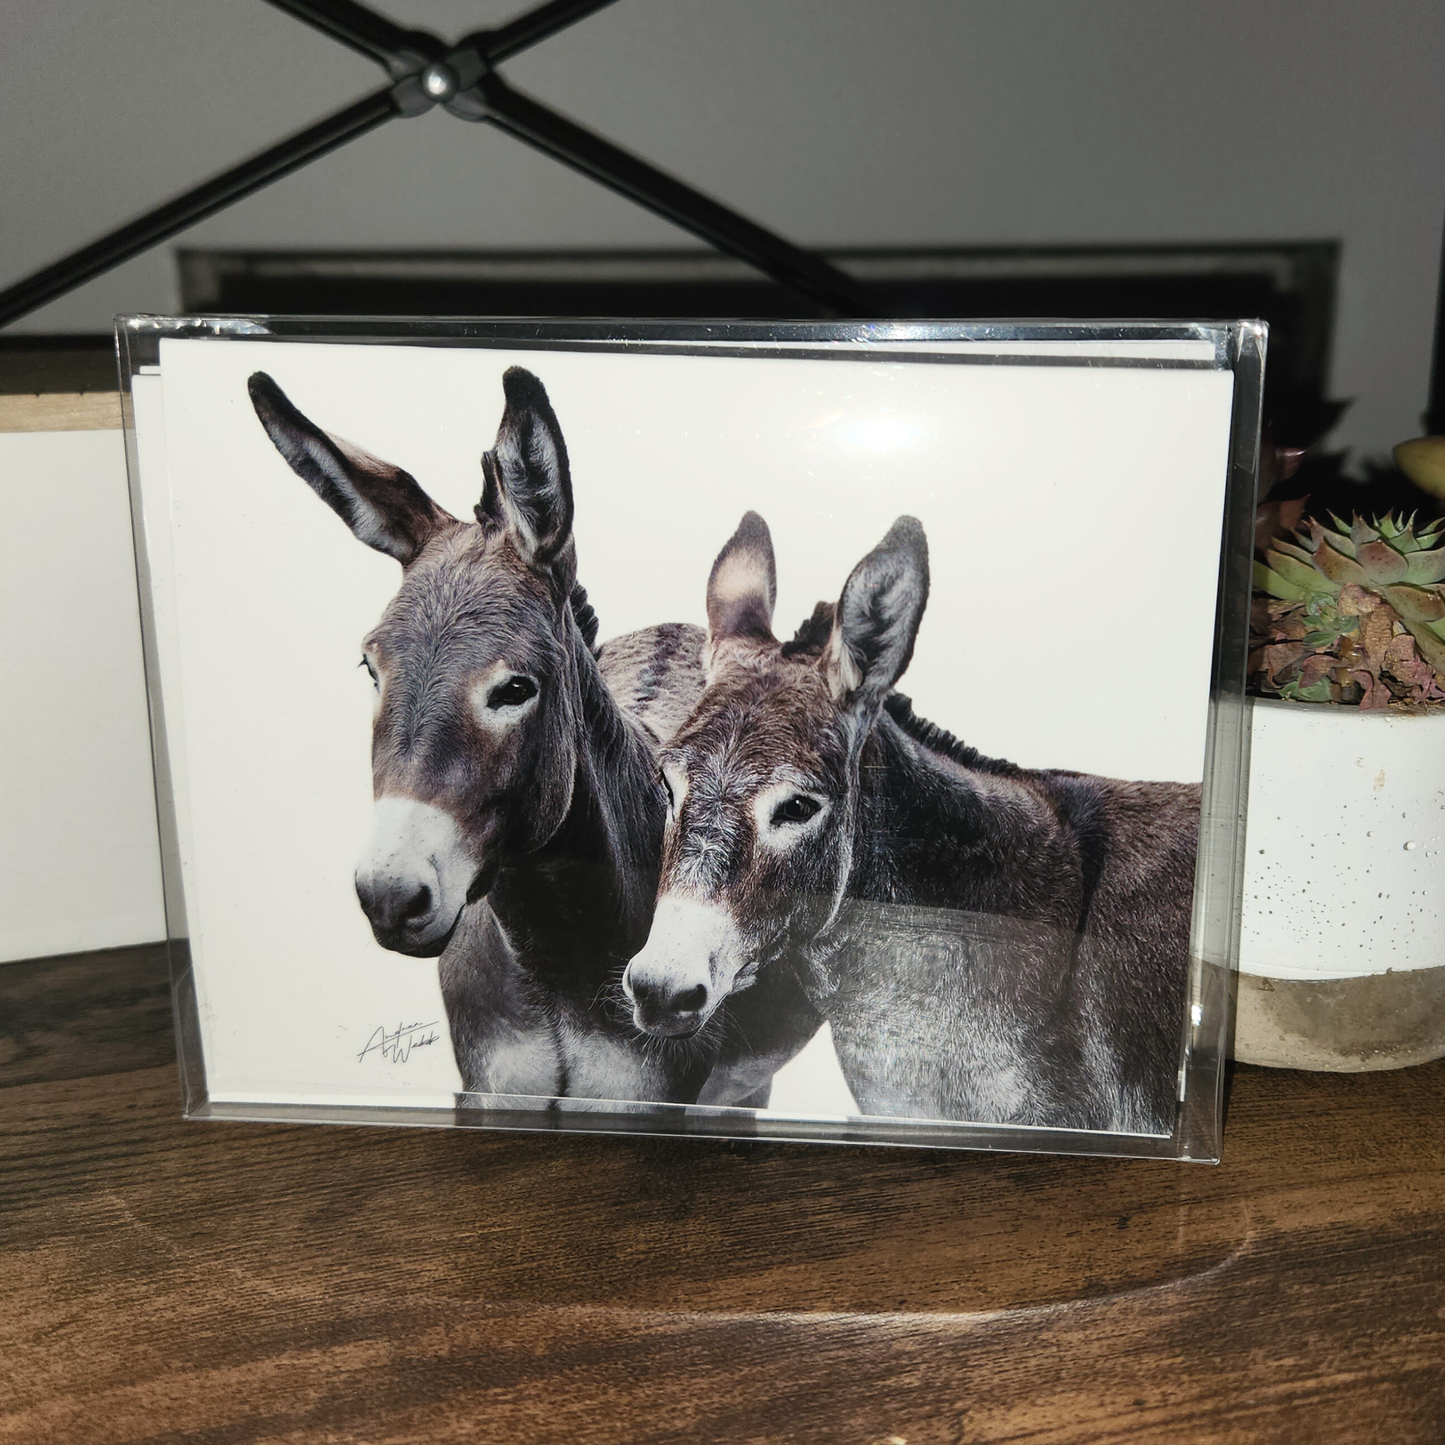 This product is a donkey pair on a folded notecard greeting card and is a set of 10. This donkey pair is printed on 14 pt. cardstock matte paper.